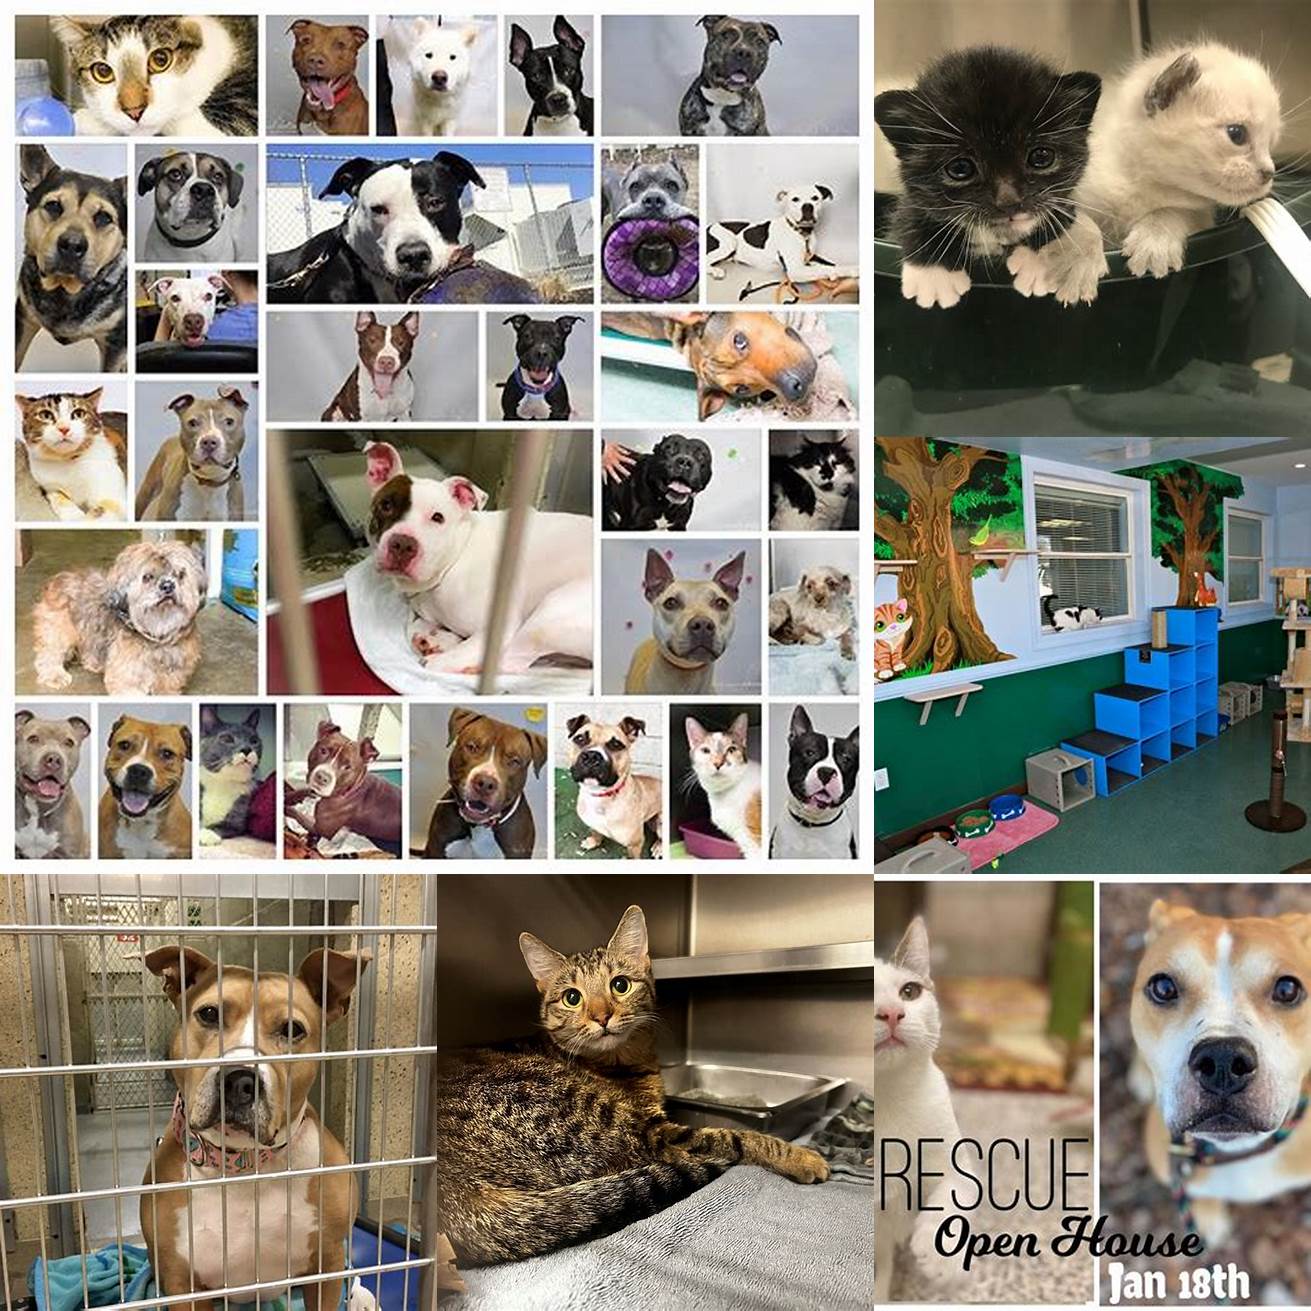 The Town of Hempstead Animal Shelter